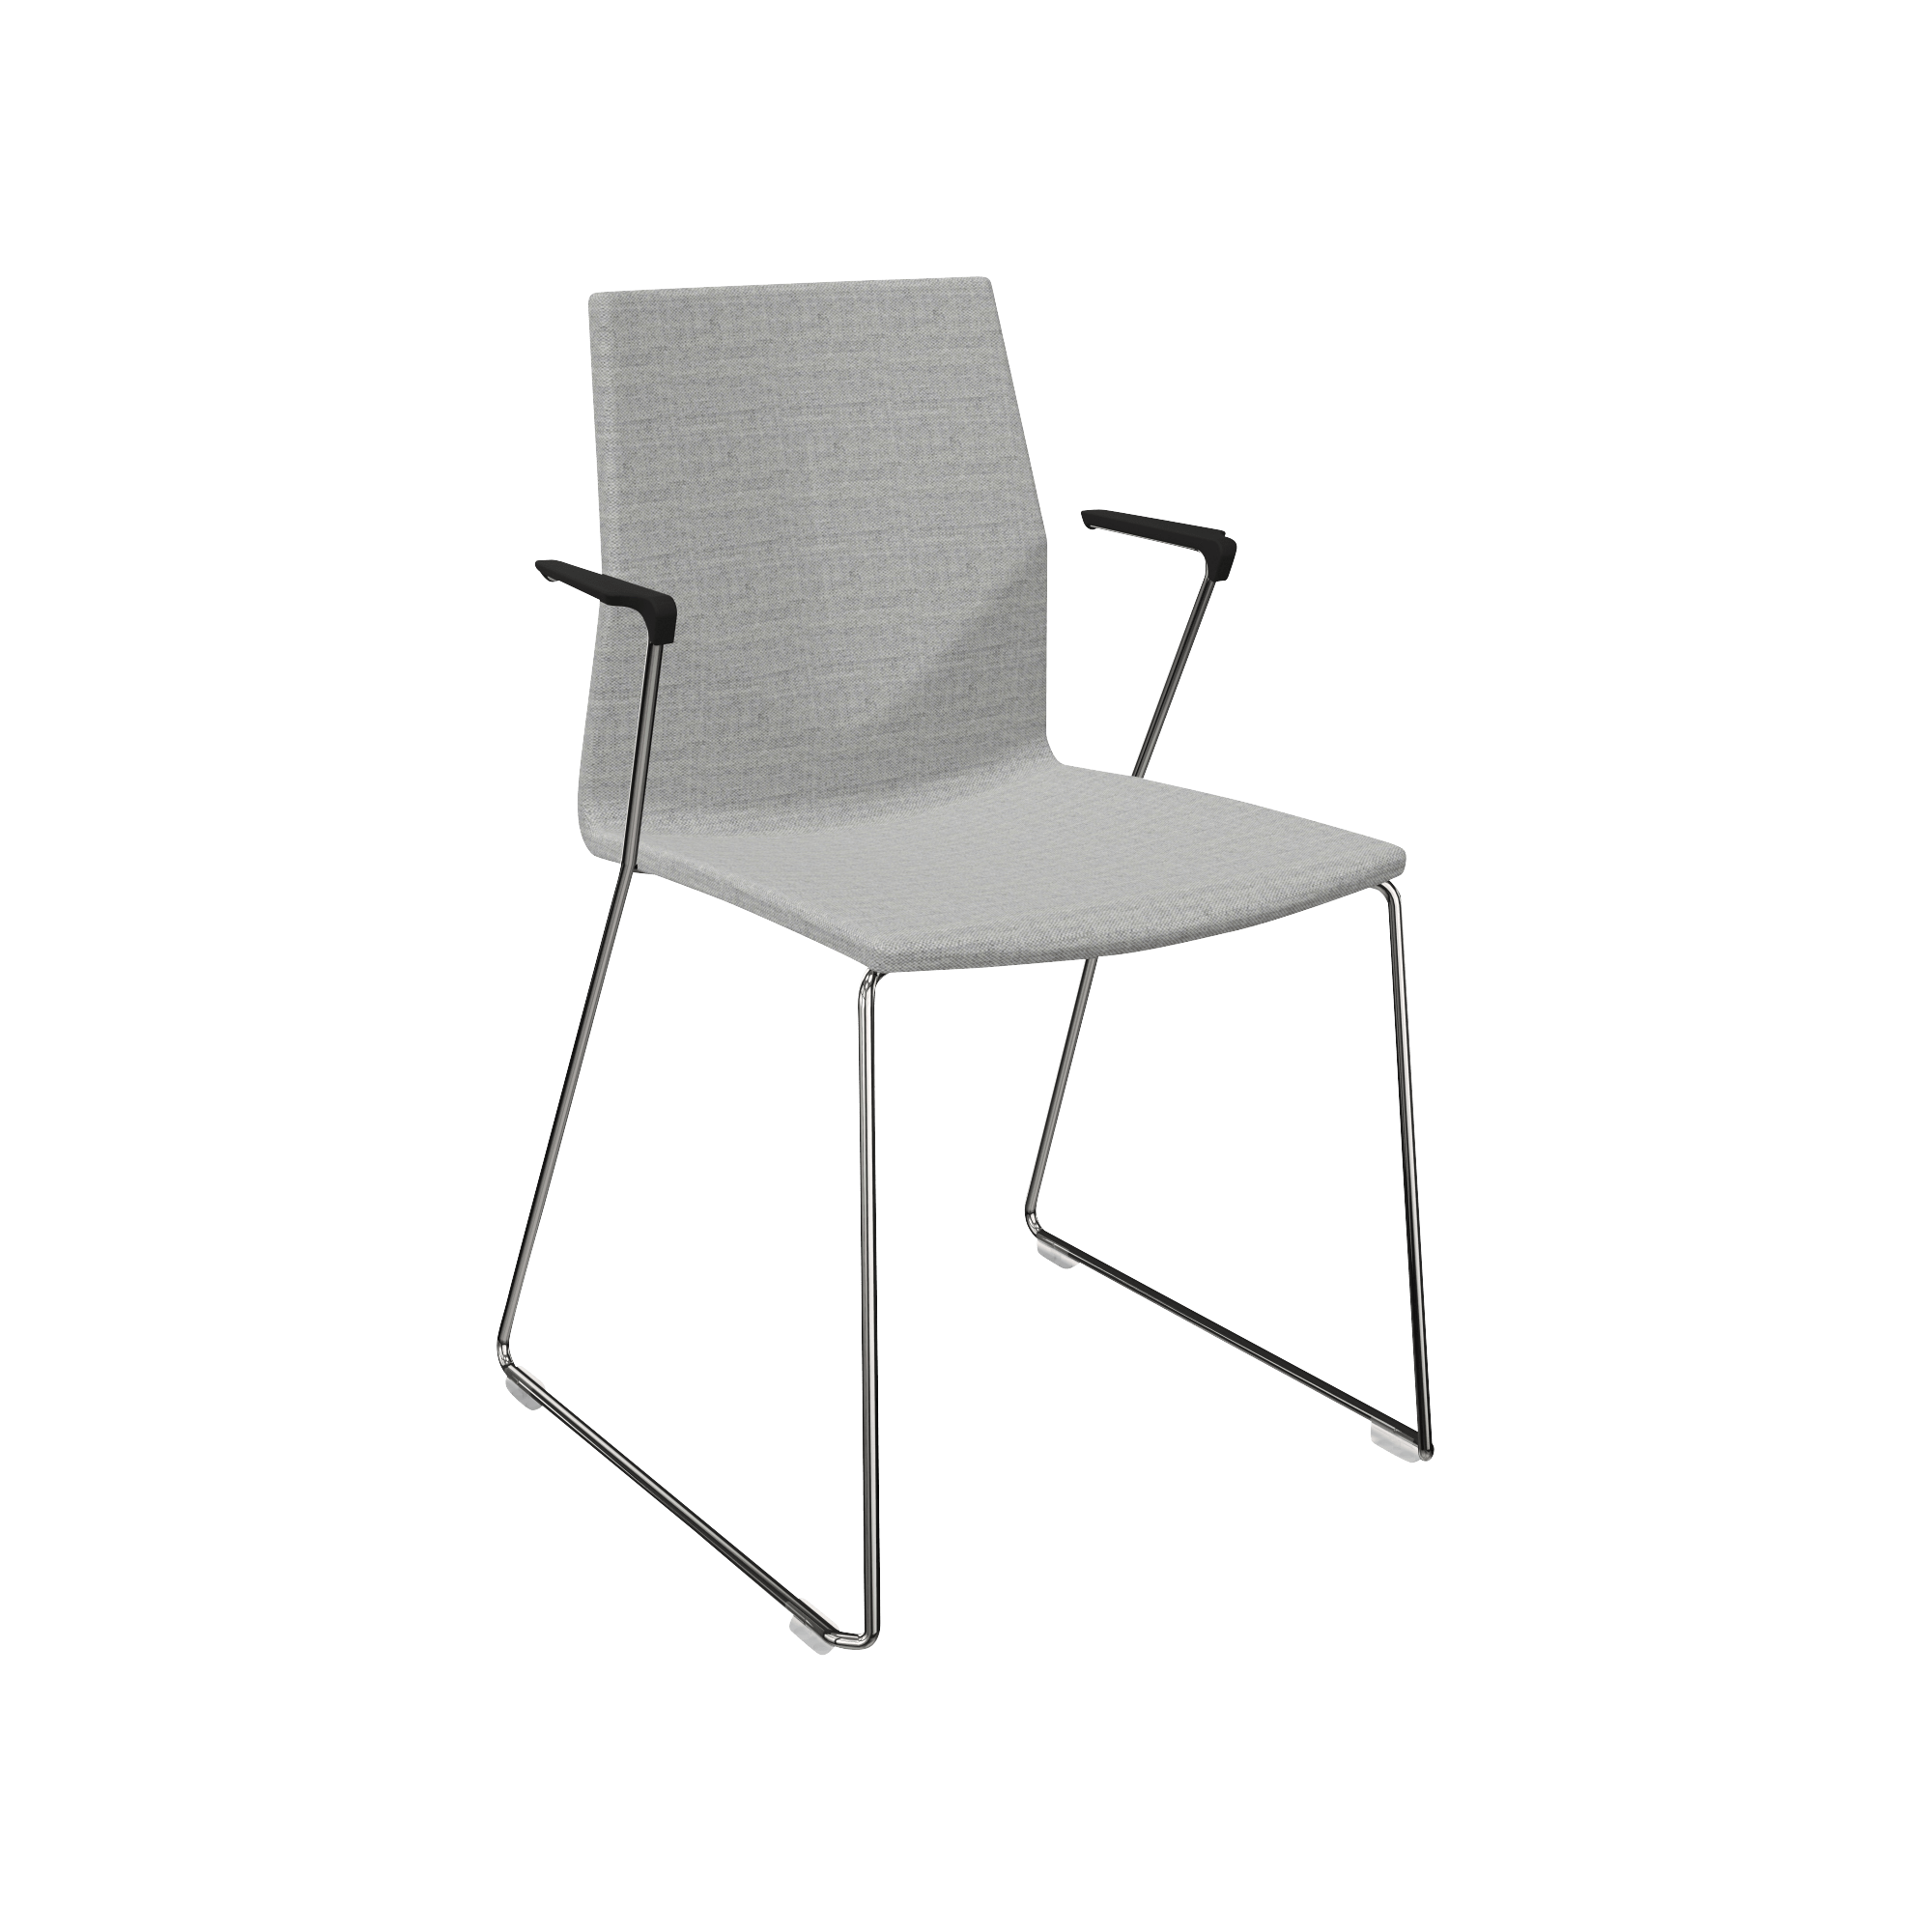 grey chair with metal legs and arm rests